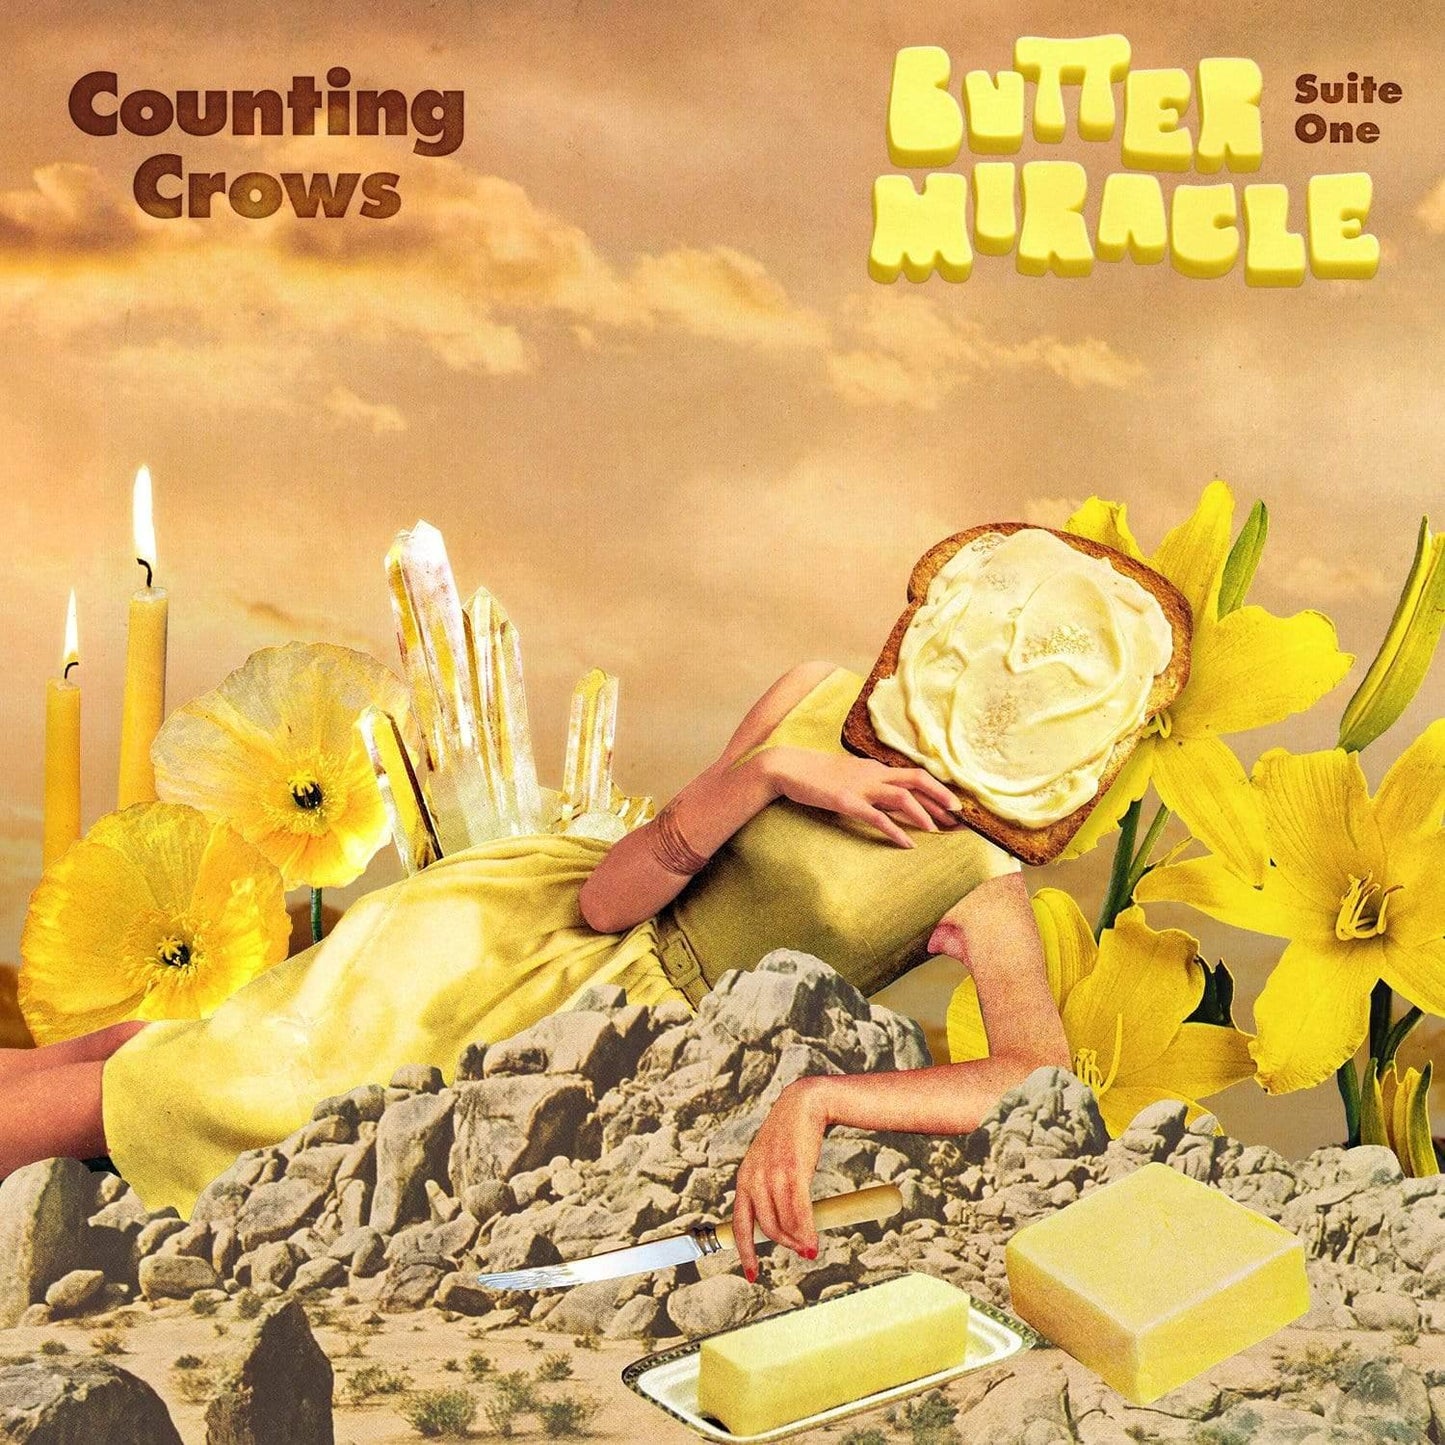 Counting Crows - Butter Miracle Suite One (Limited Edition) (Vinyl) - Joco Records